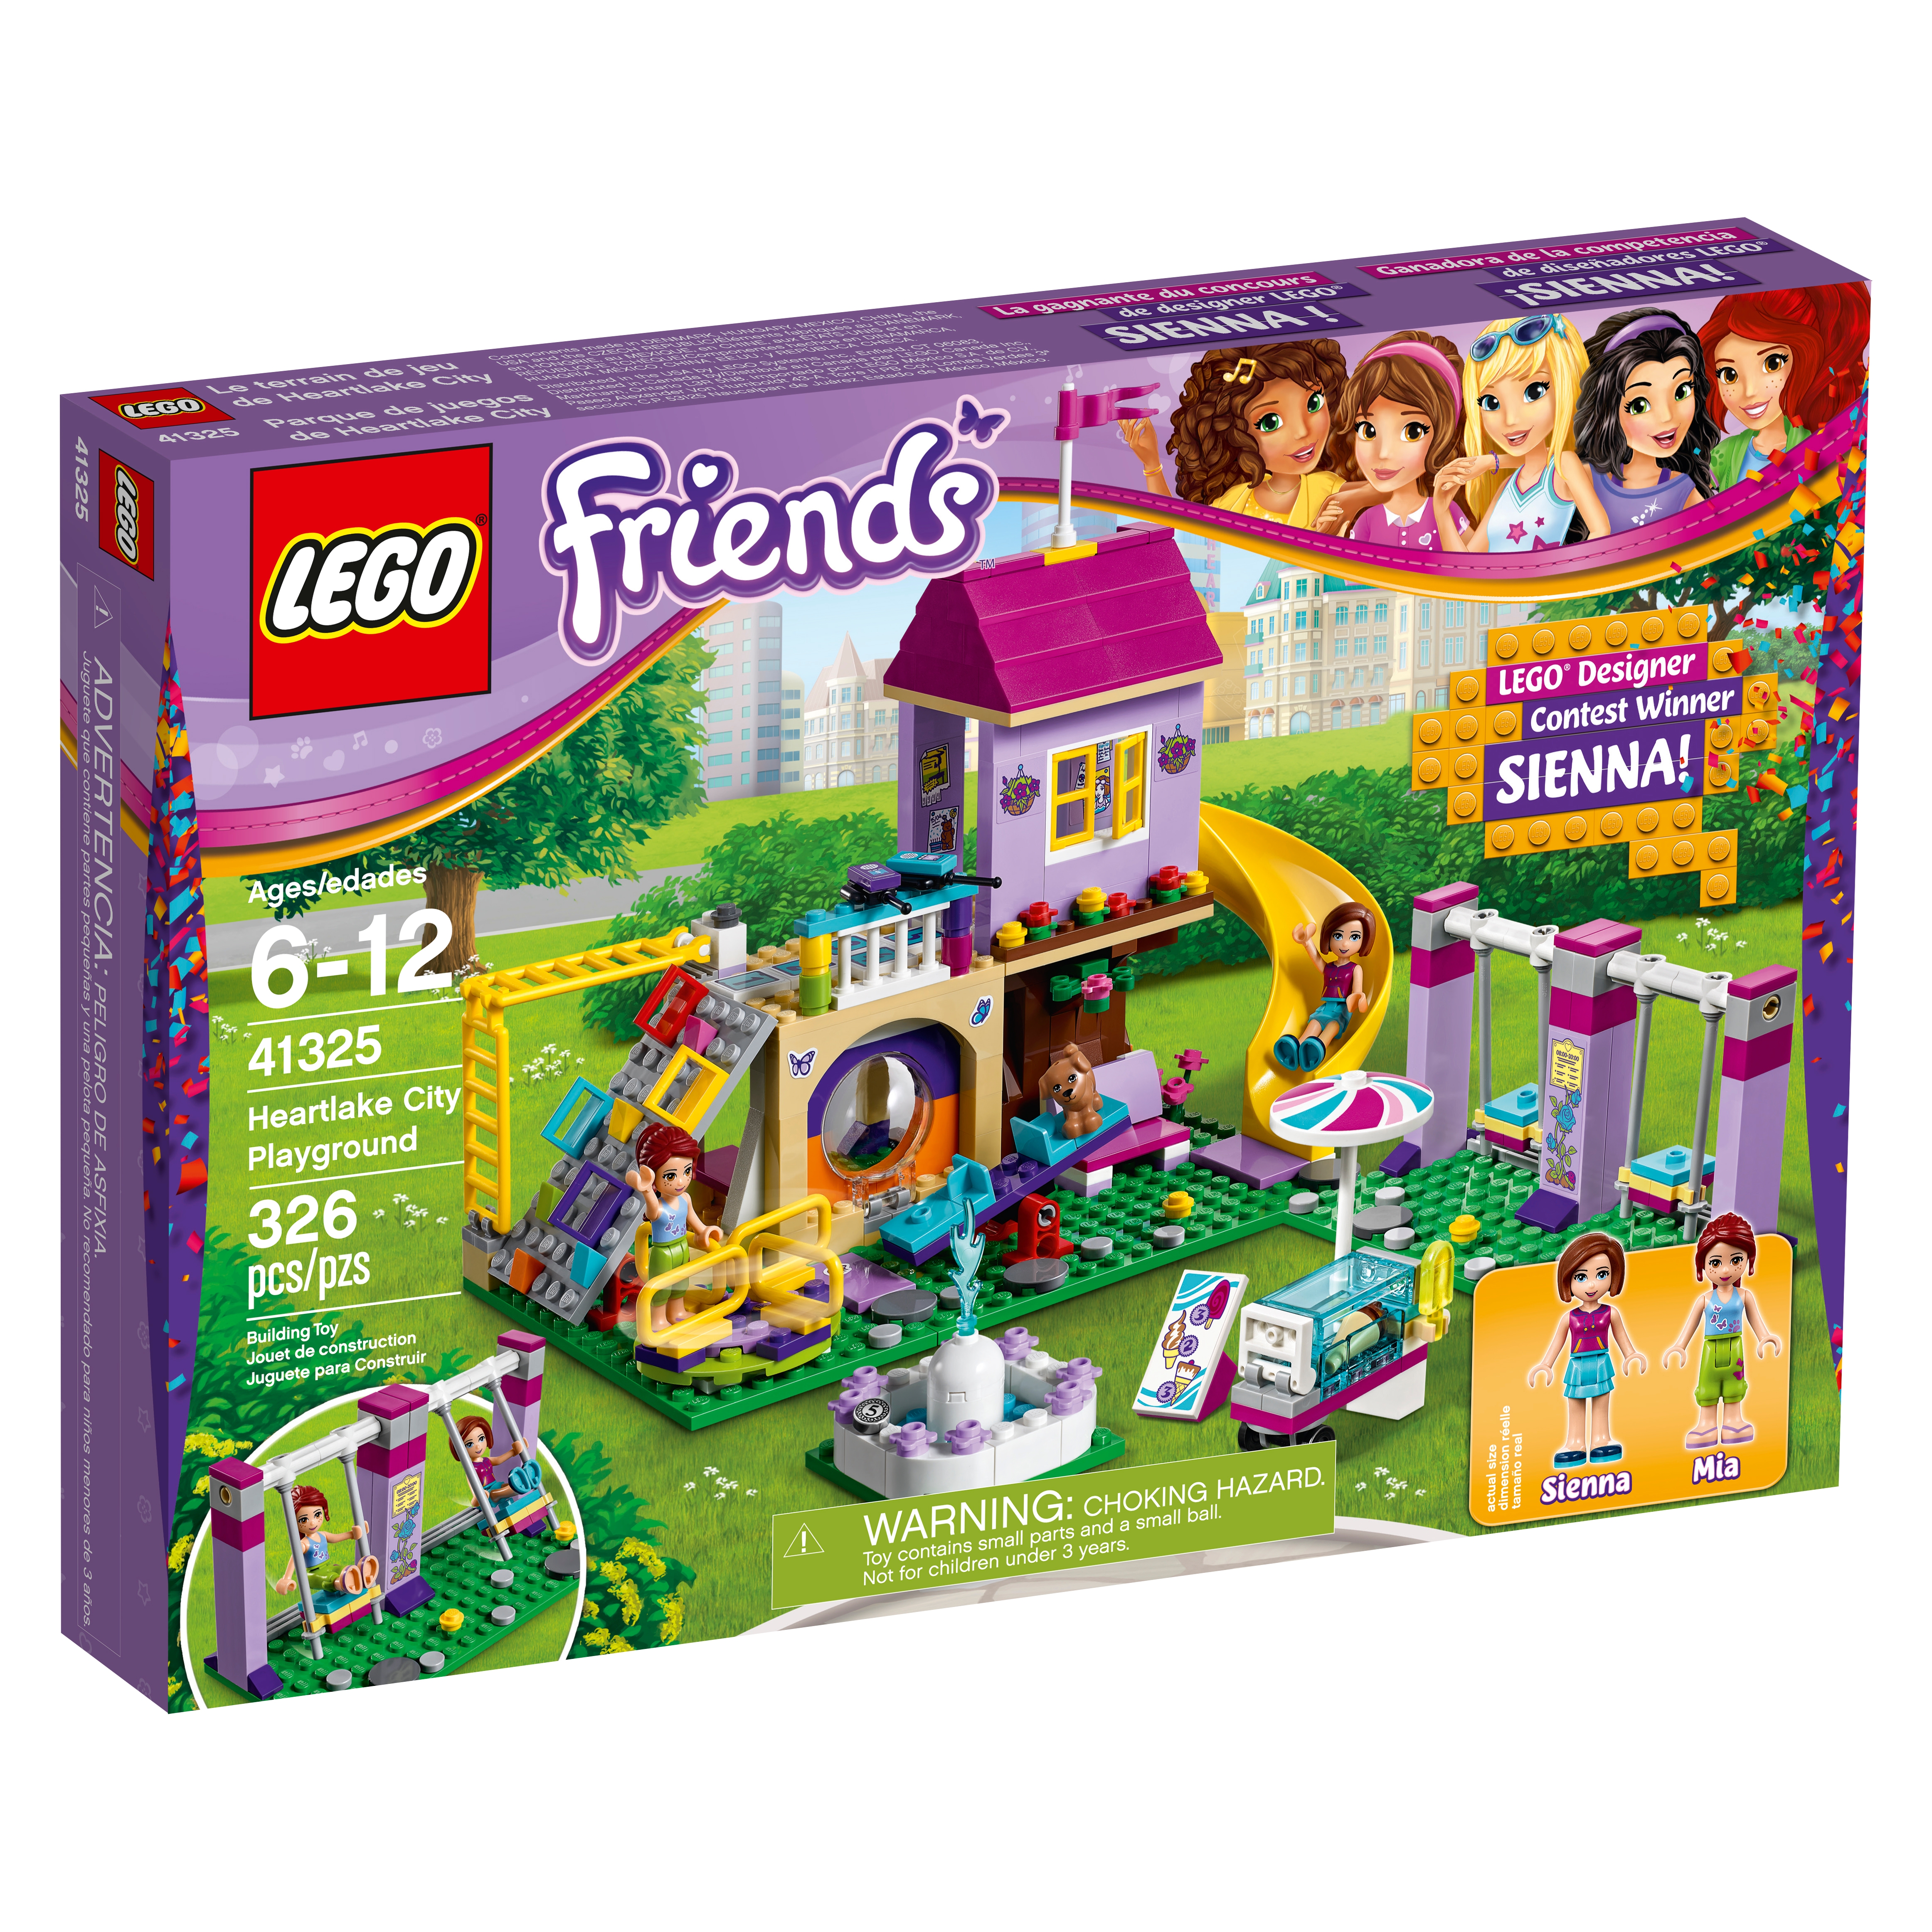 LEGO Friends 10th anniversary exclusive golden gift revealed